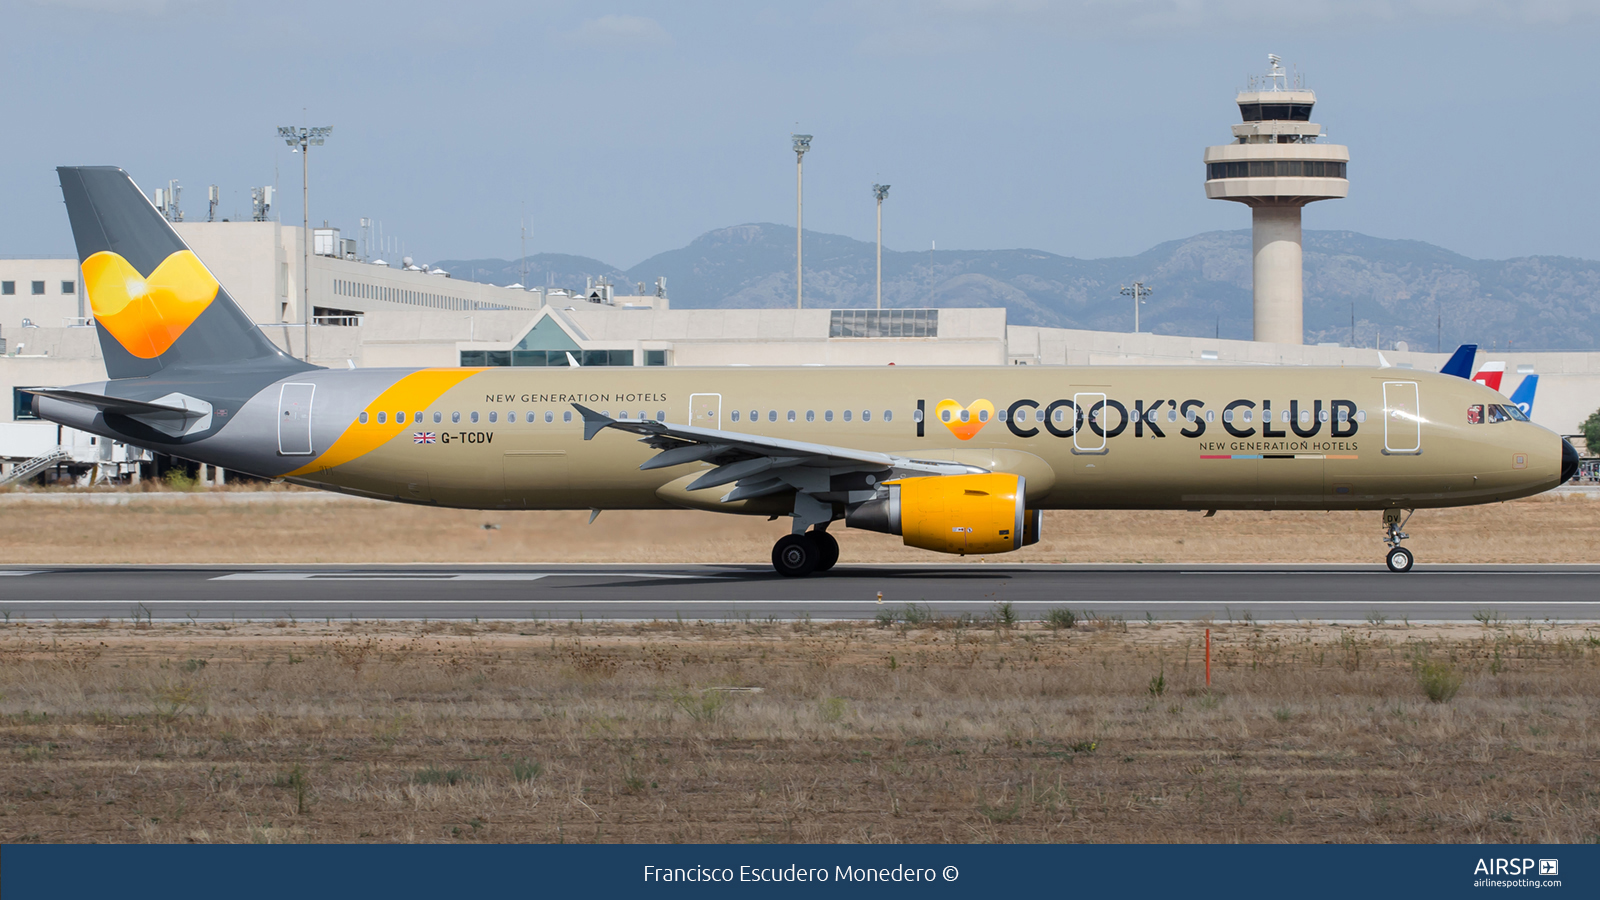 Thomas Cook Airlines  Airbus A321  G-TCDV